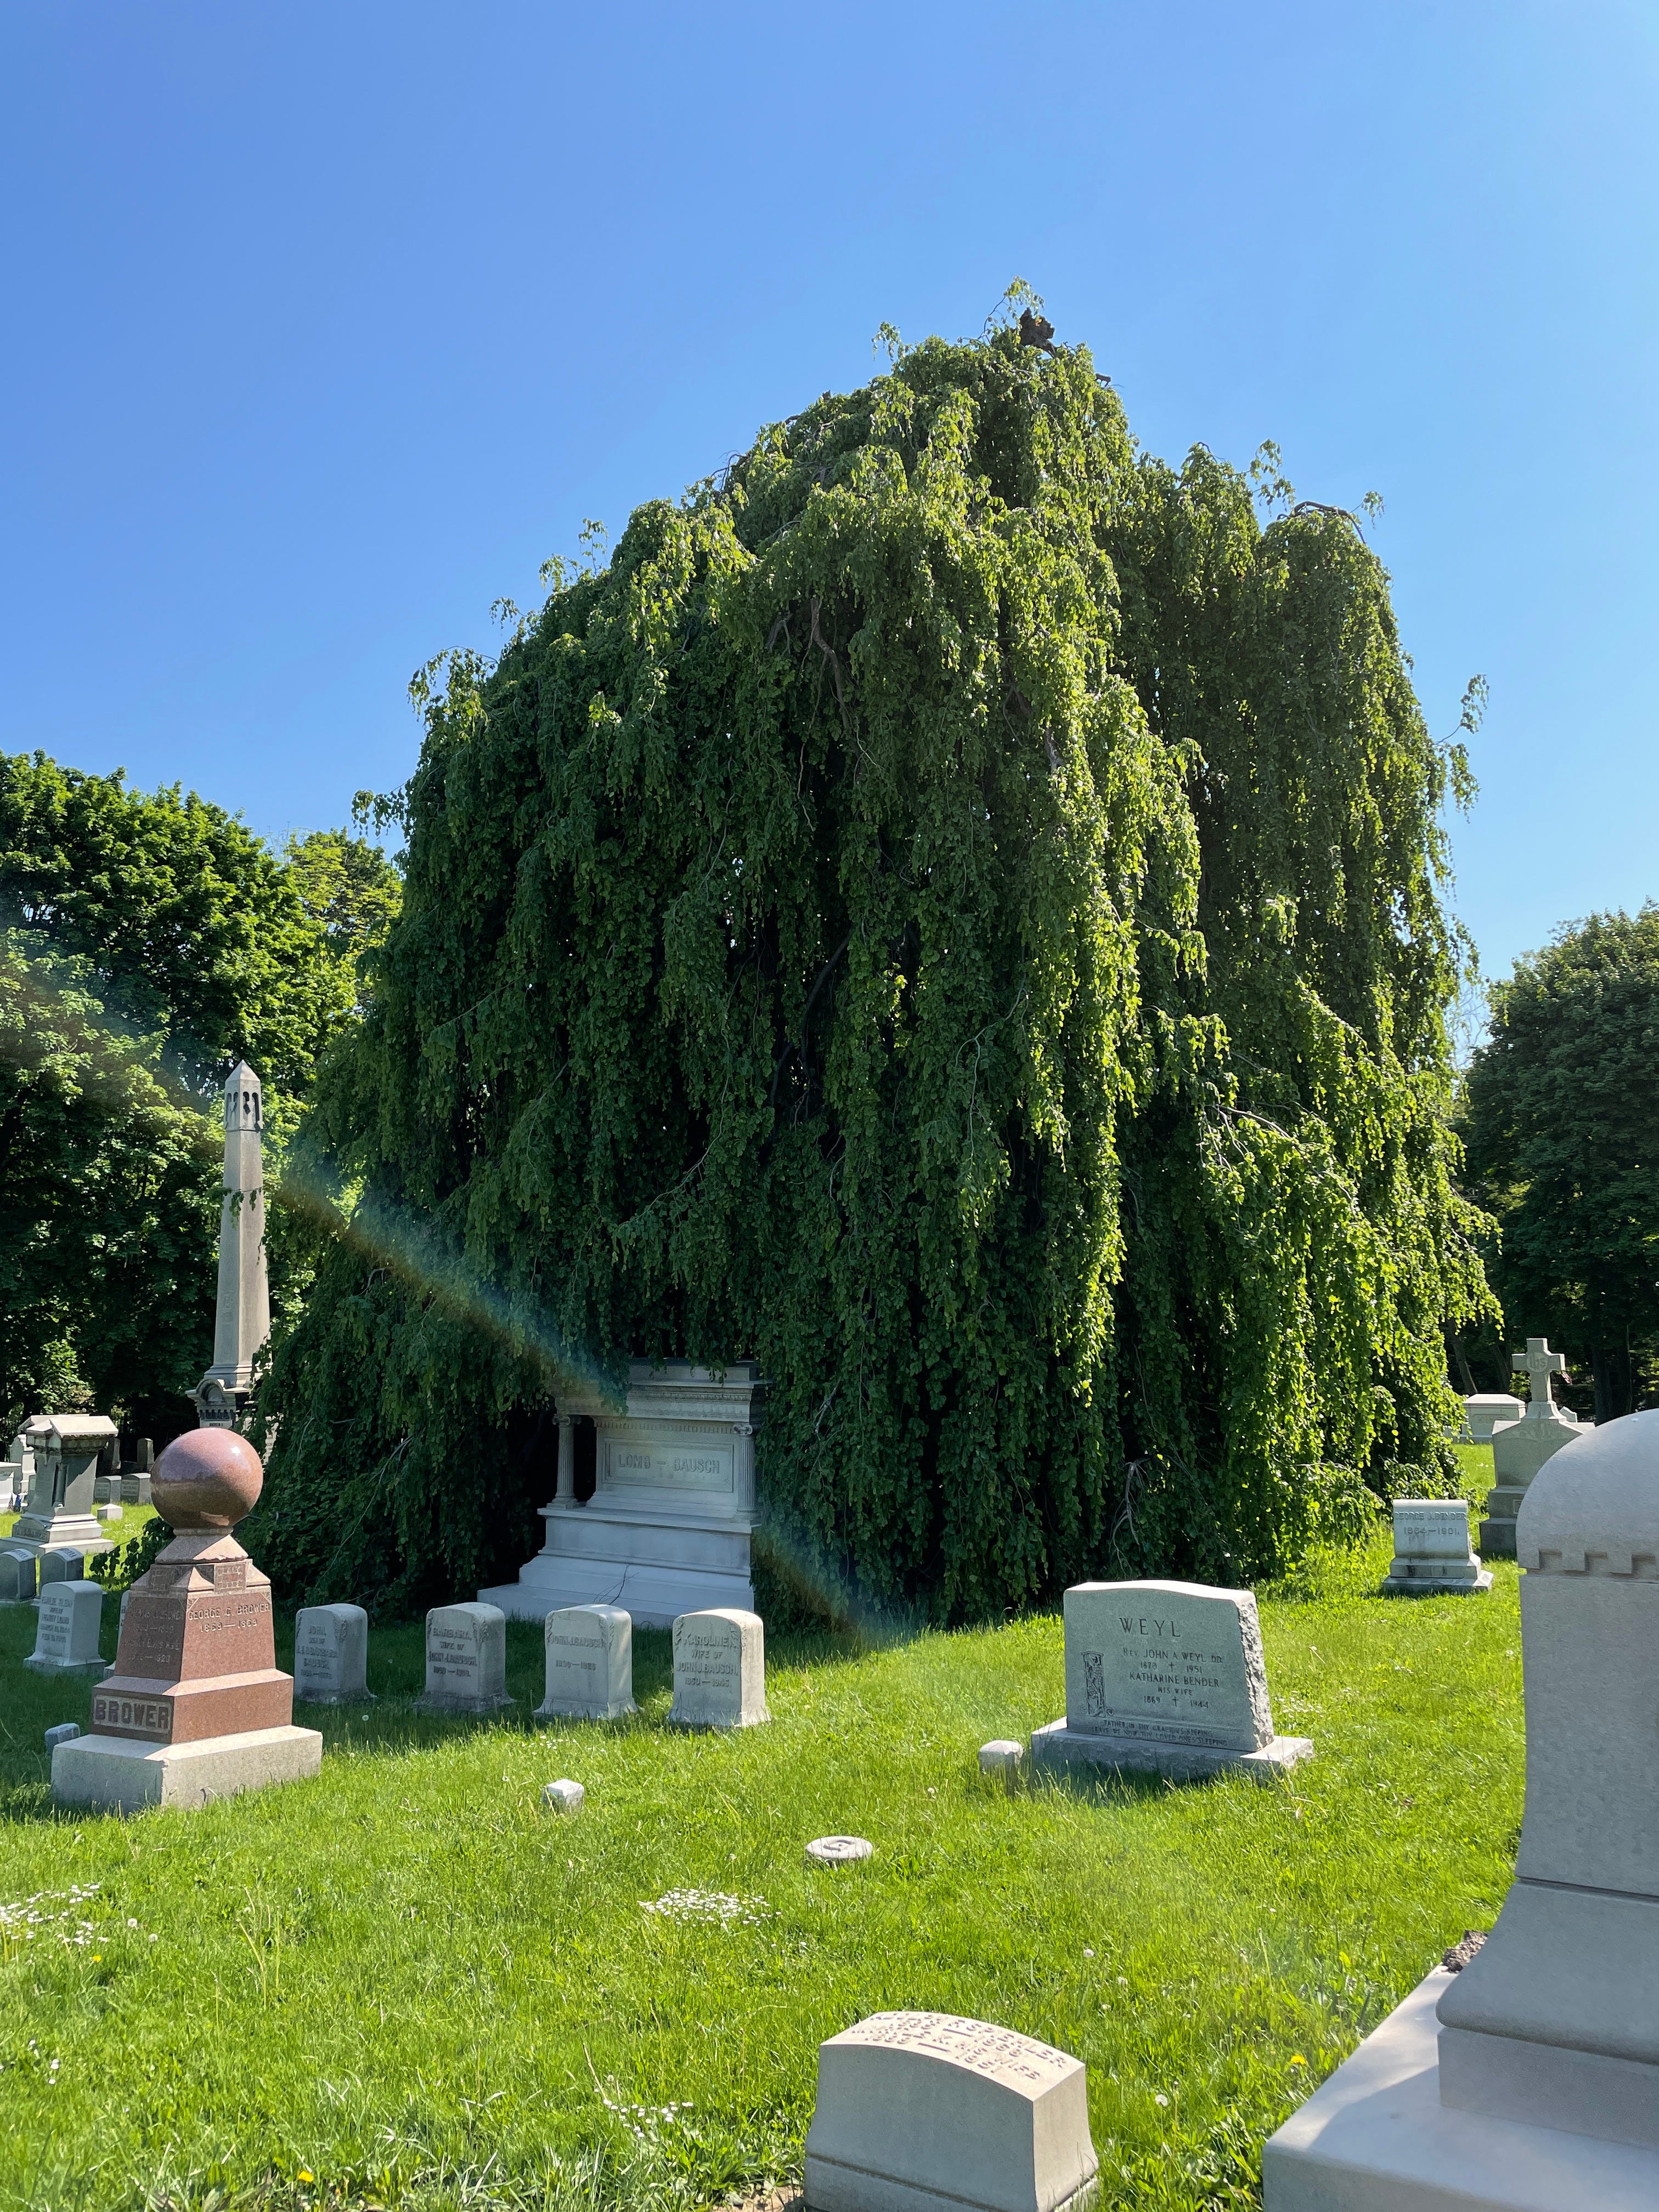 Tree Stories: Weeping beech at Mount Hope Cemetery. "You don't see a lot of them around. It's just a magnificent tree in my mind; it's one that, whenever I'm in Mount Hope, I at least take a drive by to see," Brian Liberti said.